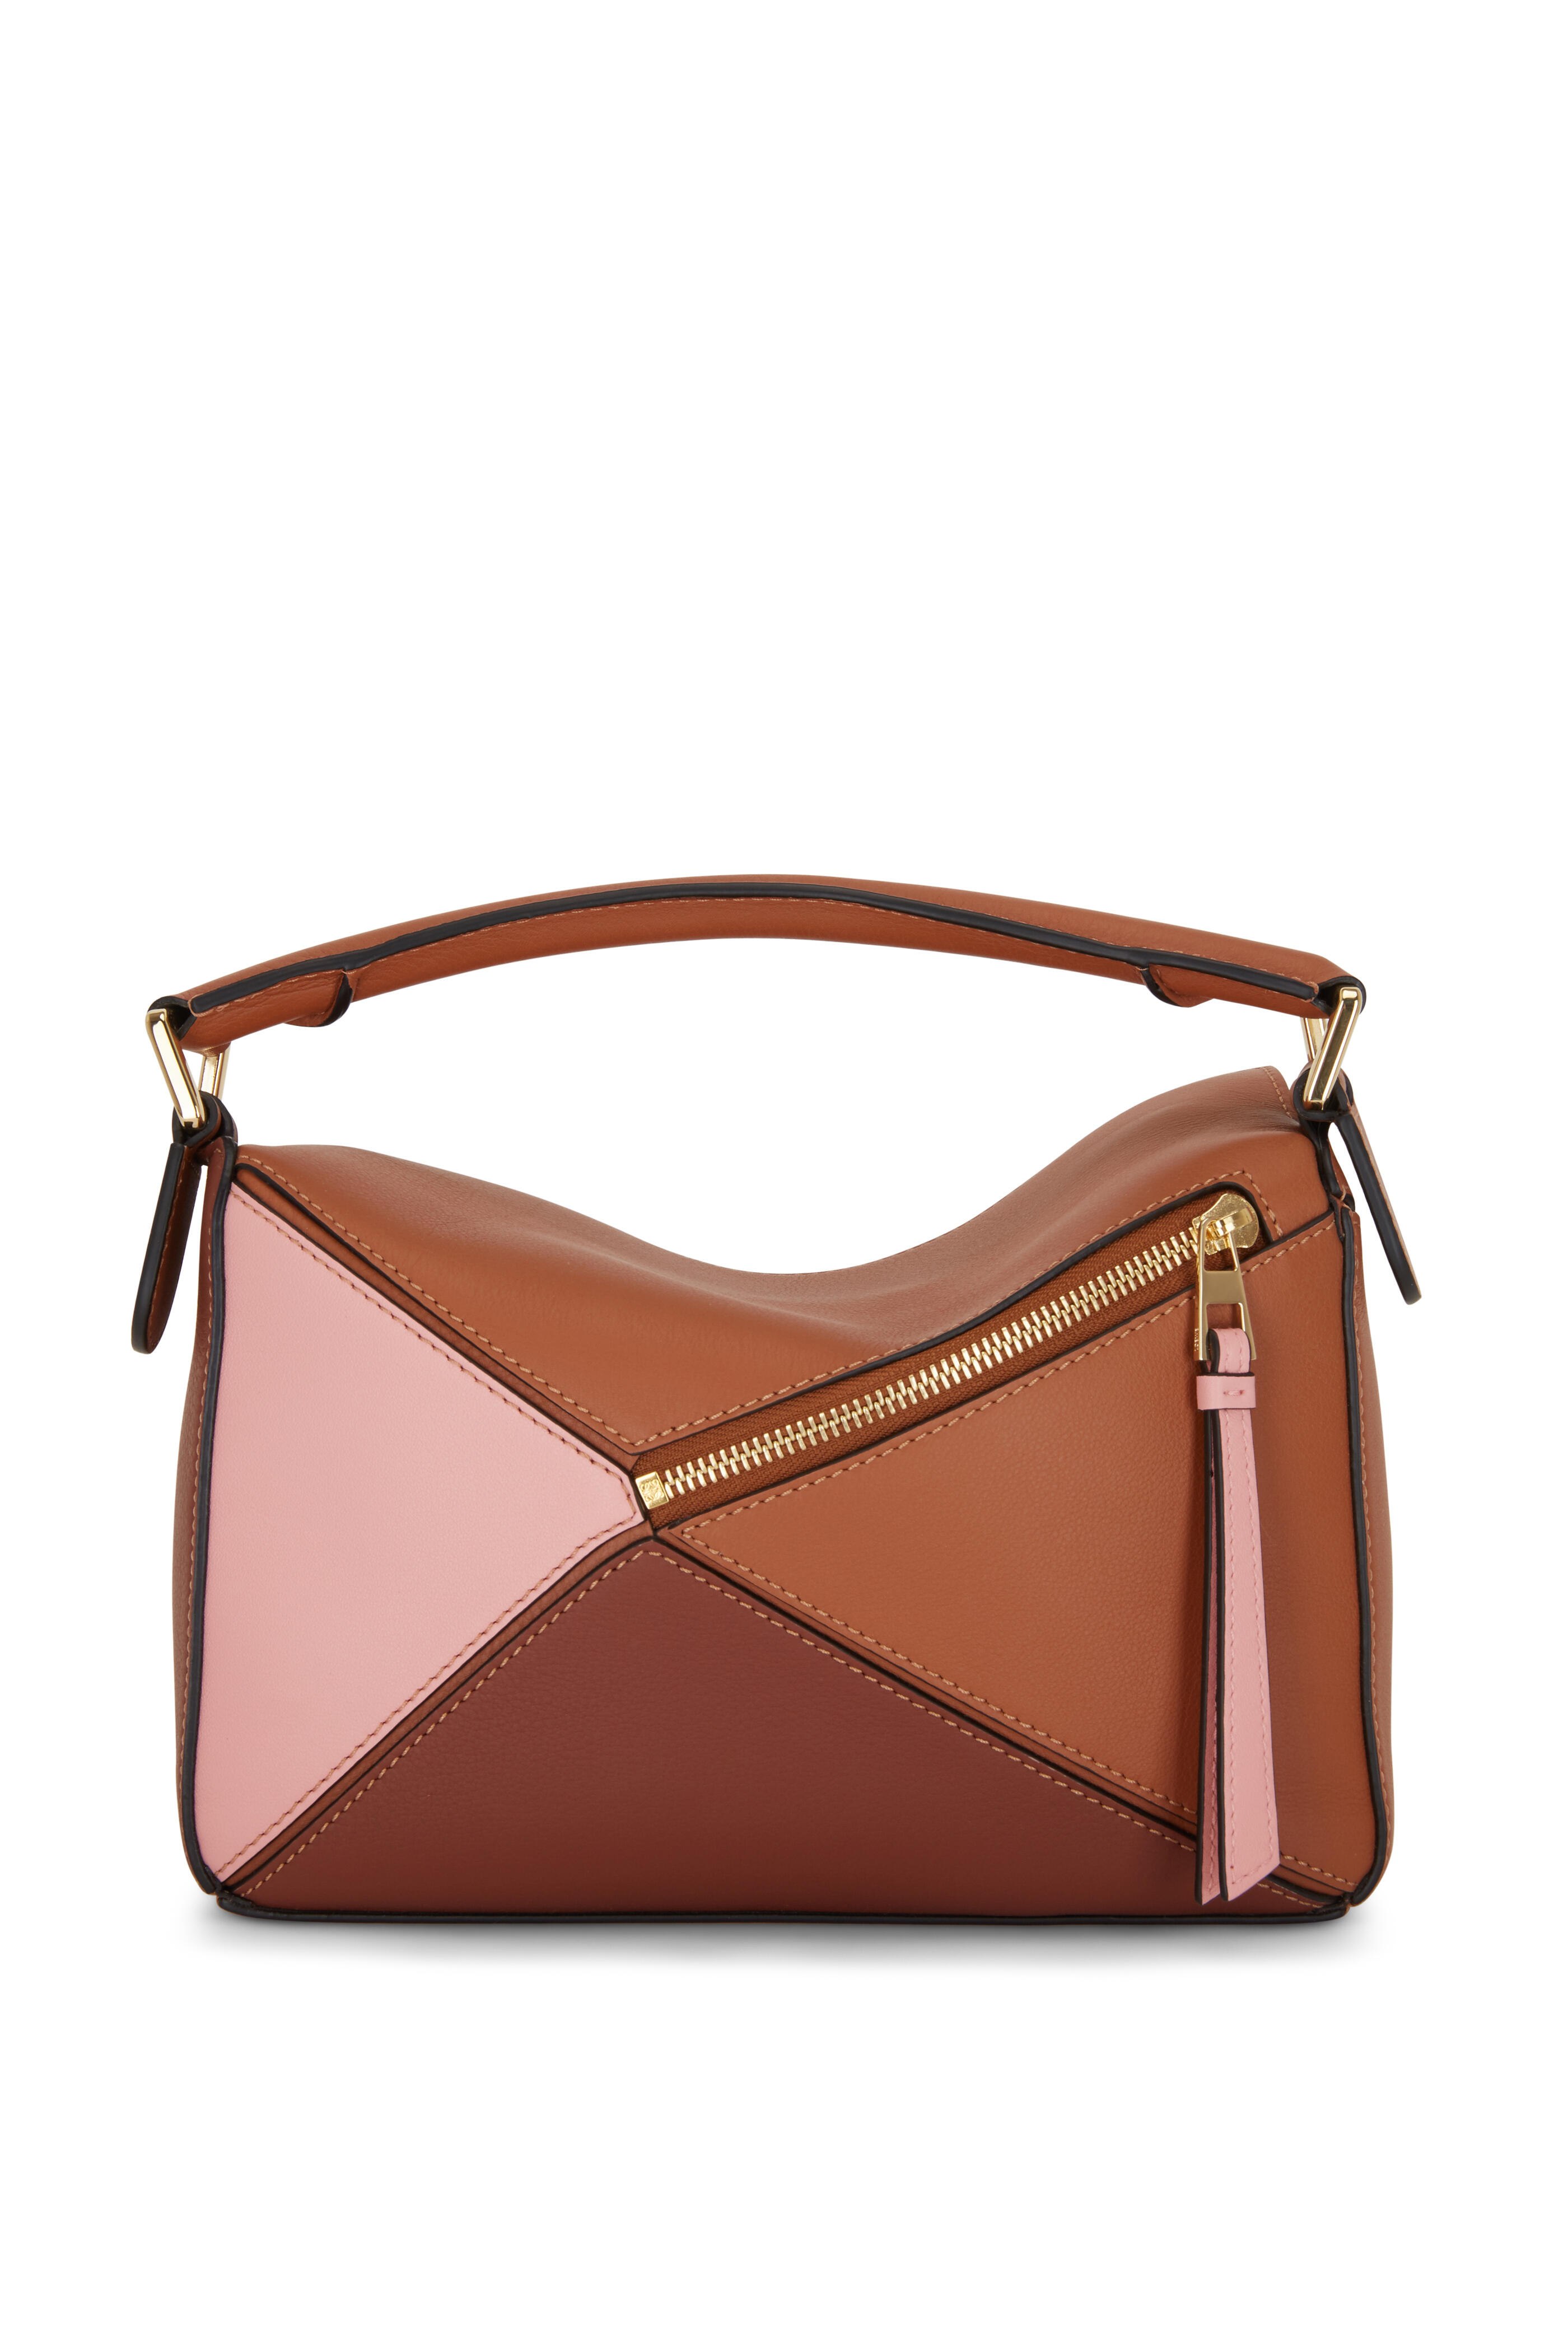 Loewe Puzzle Small Leather Bag in Pink